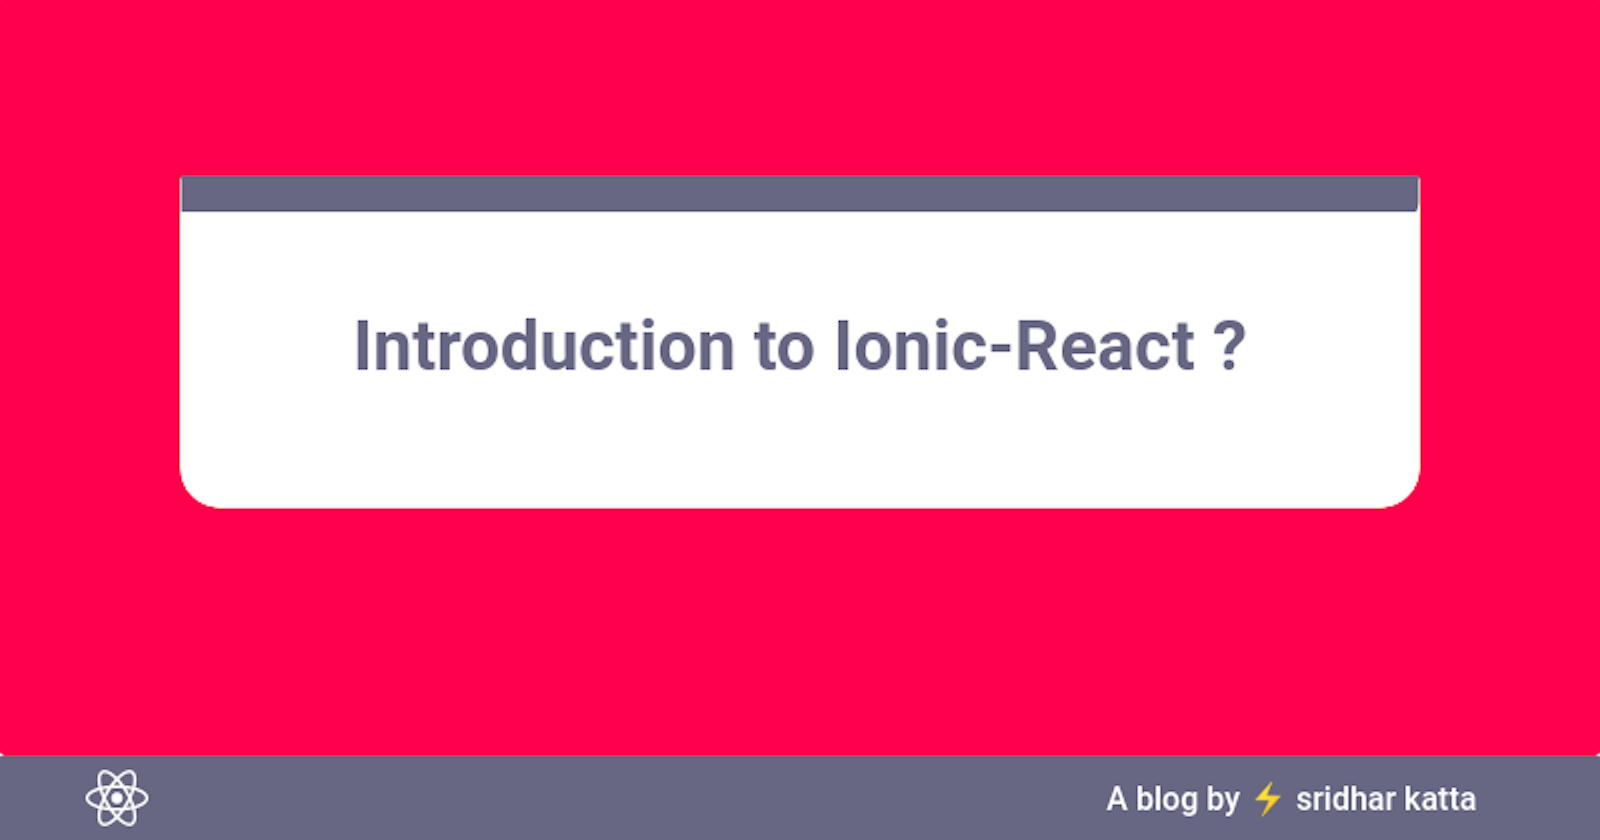 Introduction to Ionic-react?